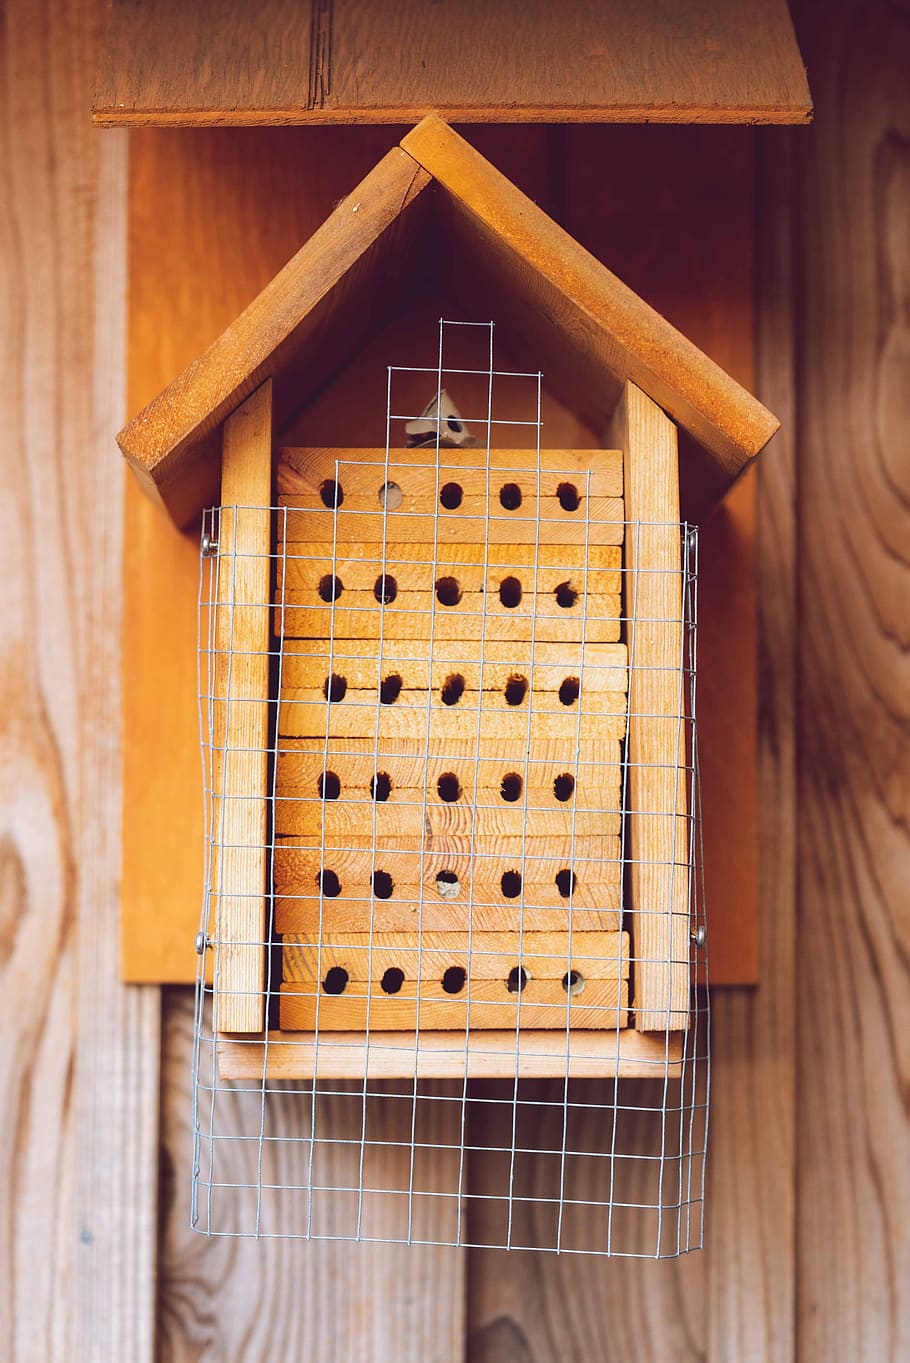 insect house, bee hotel, solitary bees, wild, wood, wooden home, solitary hive, bc, canada, protection